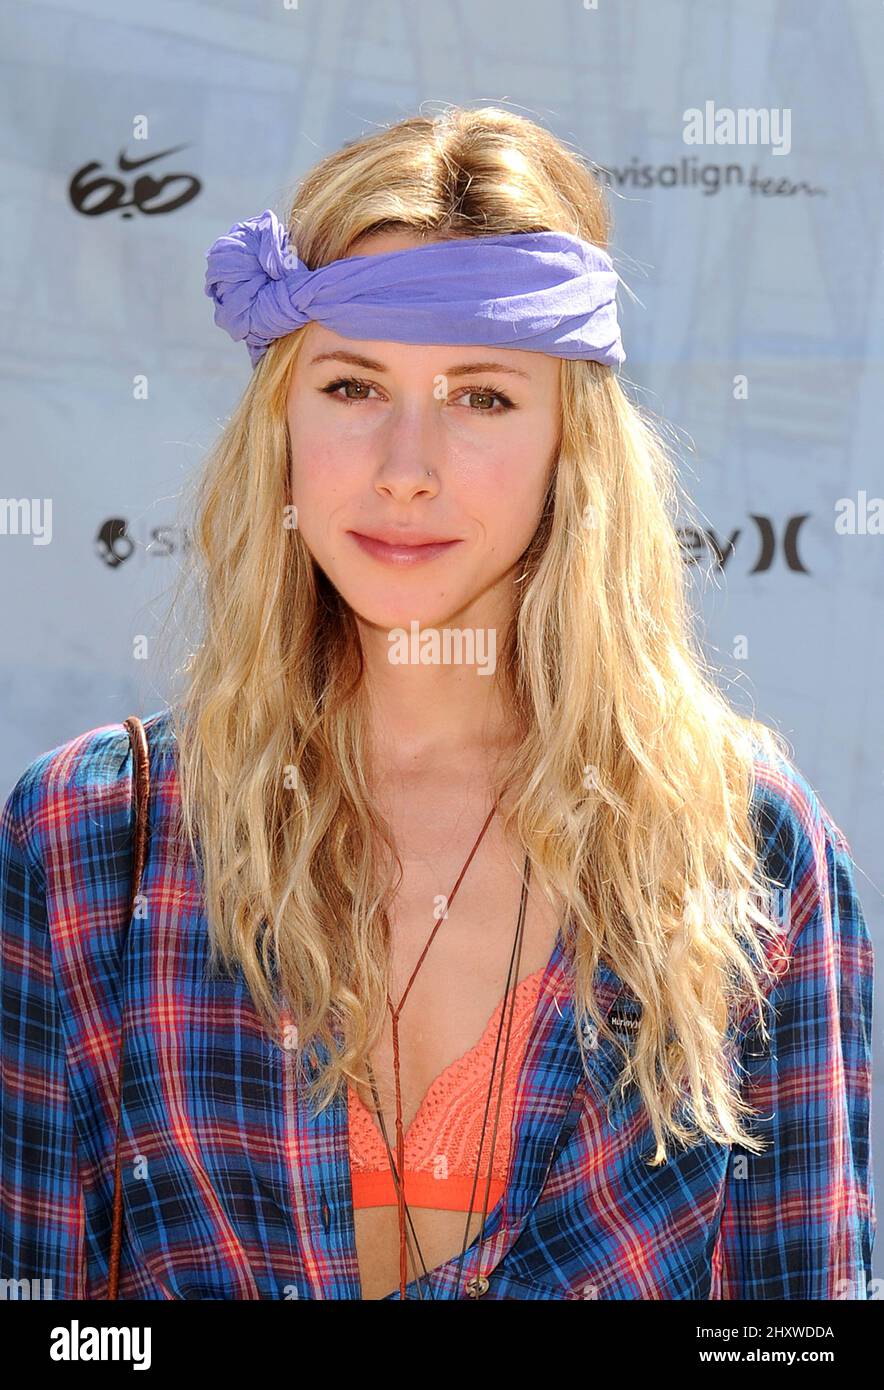 Gillian Zinser during the 2011 Hurley Walk The Walk National Championship which is hosted By Vanessa Hudgens, California Stock Photo